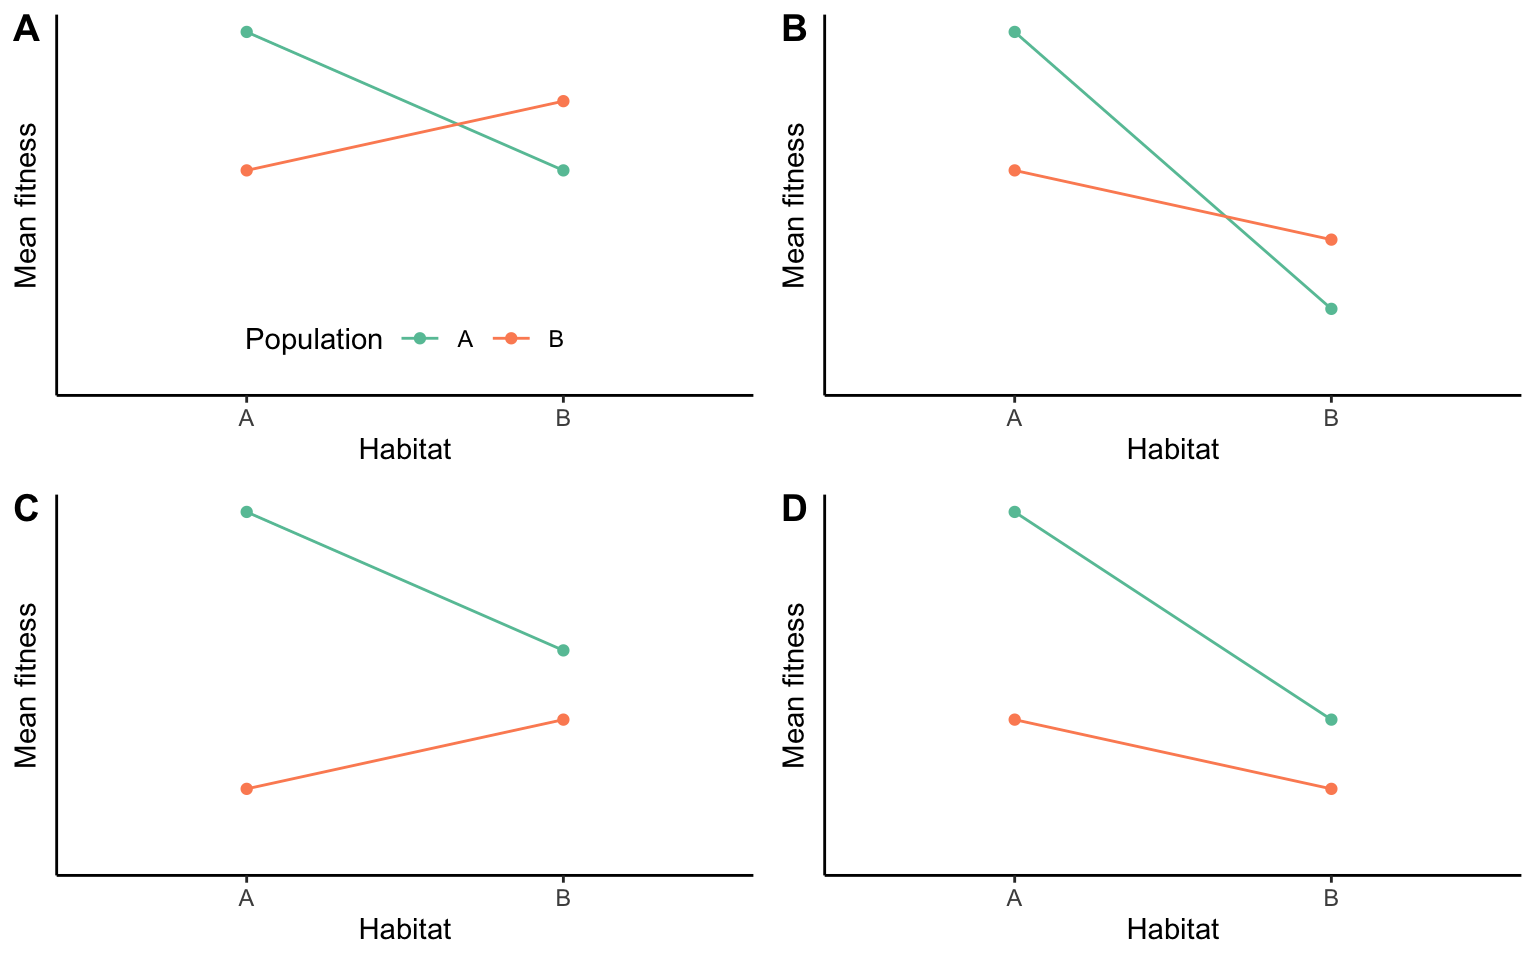 Possible outcomes of translocation experiments. Red indicates the performance of inviduals from habitat A, green the performance of individuals from habitat B. In scenarios (A) and (B), local phenotypes outperform foreign phenotypes in their own habitat. In scenarios (A) and (C), phenotyoes perform better in their home habitat than in an away habitat. Note that only scenarios (A) and (B) are examples of local adaptation. Adopted from Kawecki & Ebert (2004).